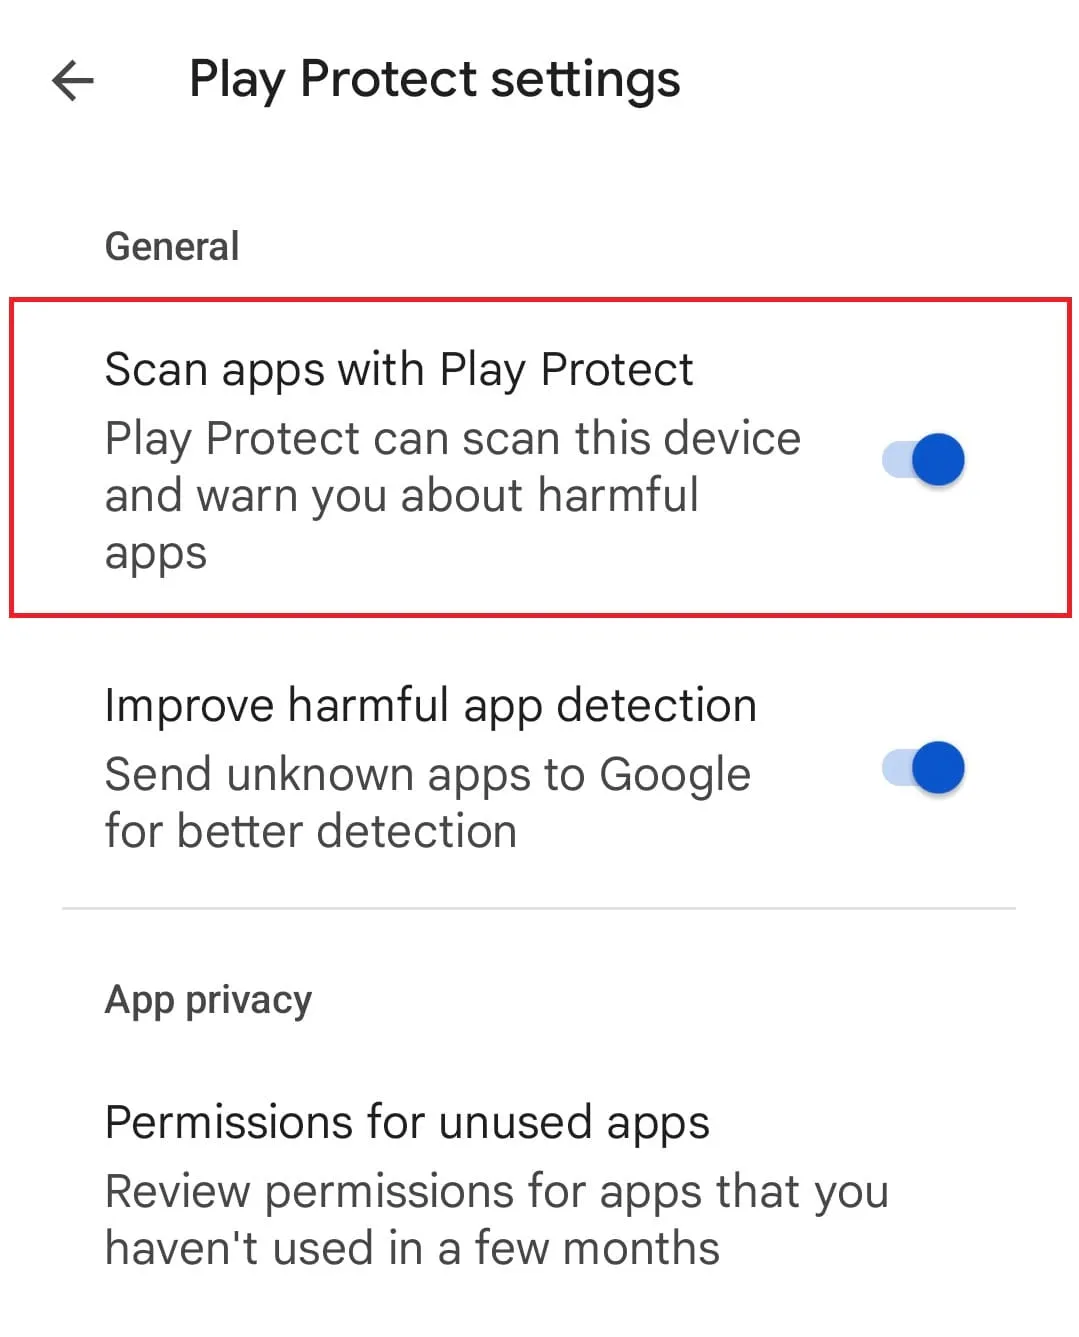 Enable Scan apps with Play Protect